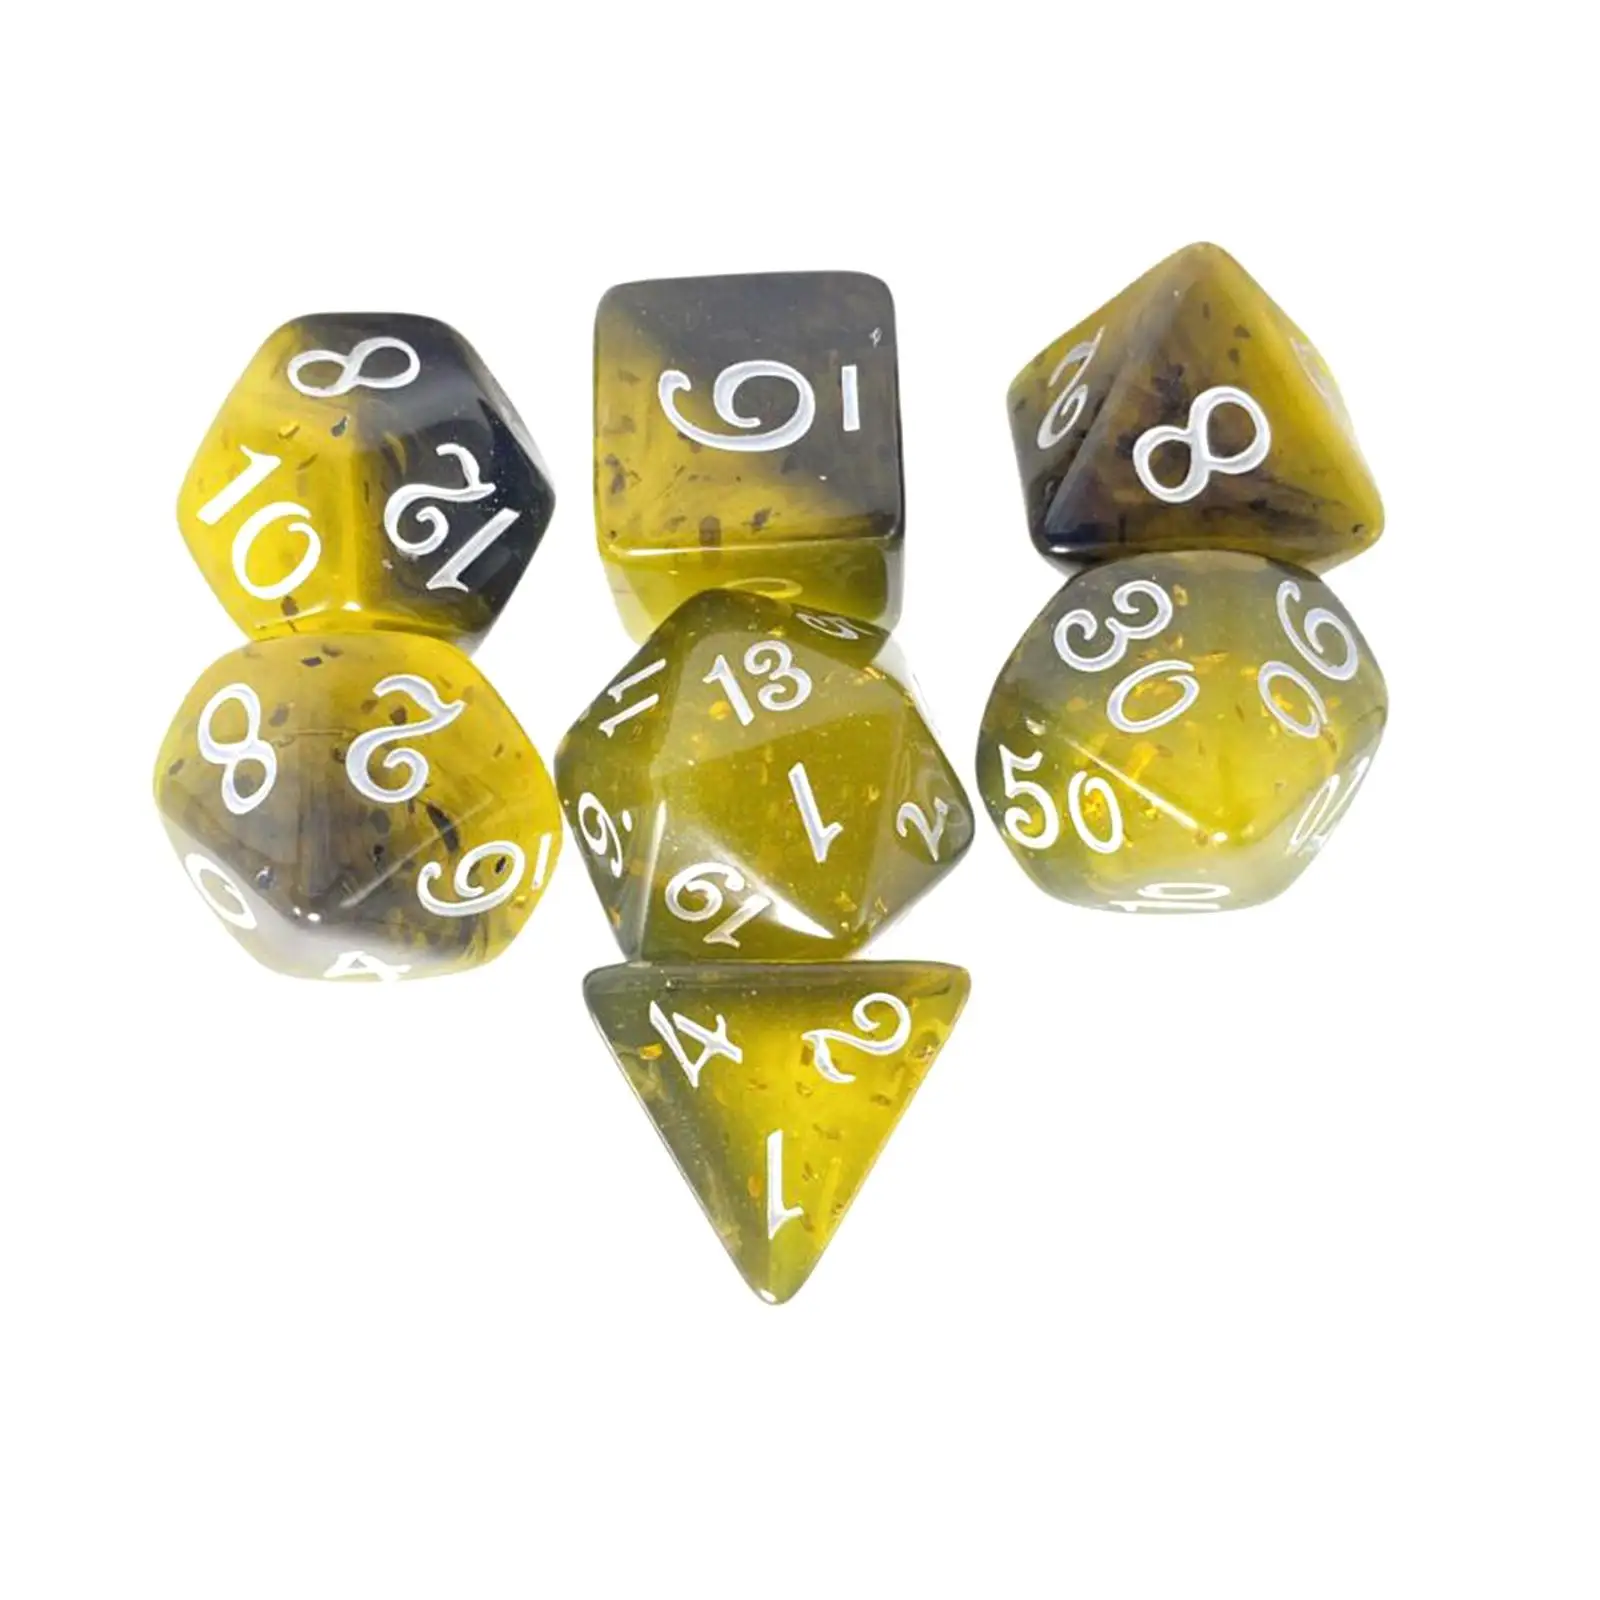 7x Polyhedral Dice Acrylic Vivid Colors Table Gaming Dice for Board Game Role